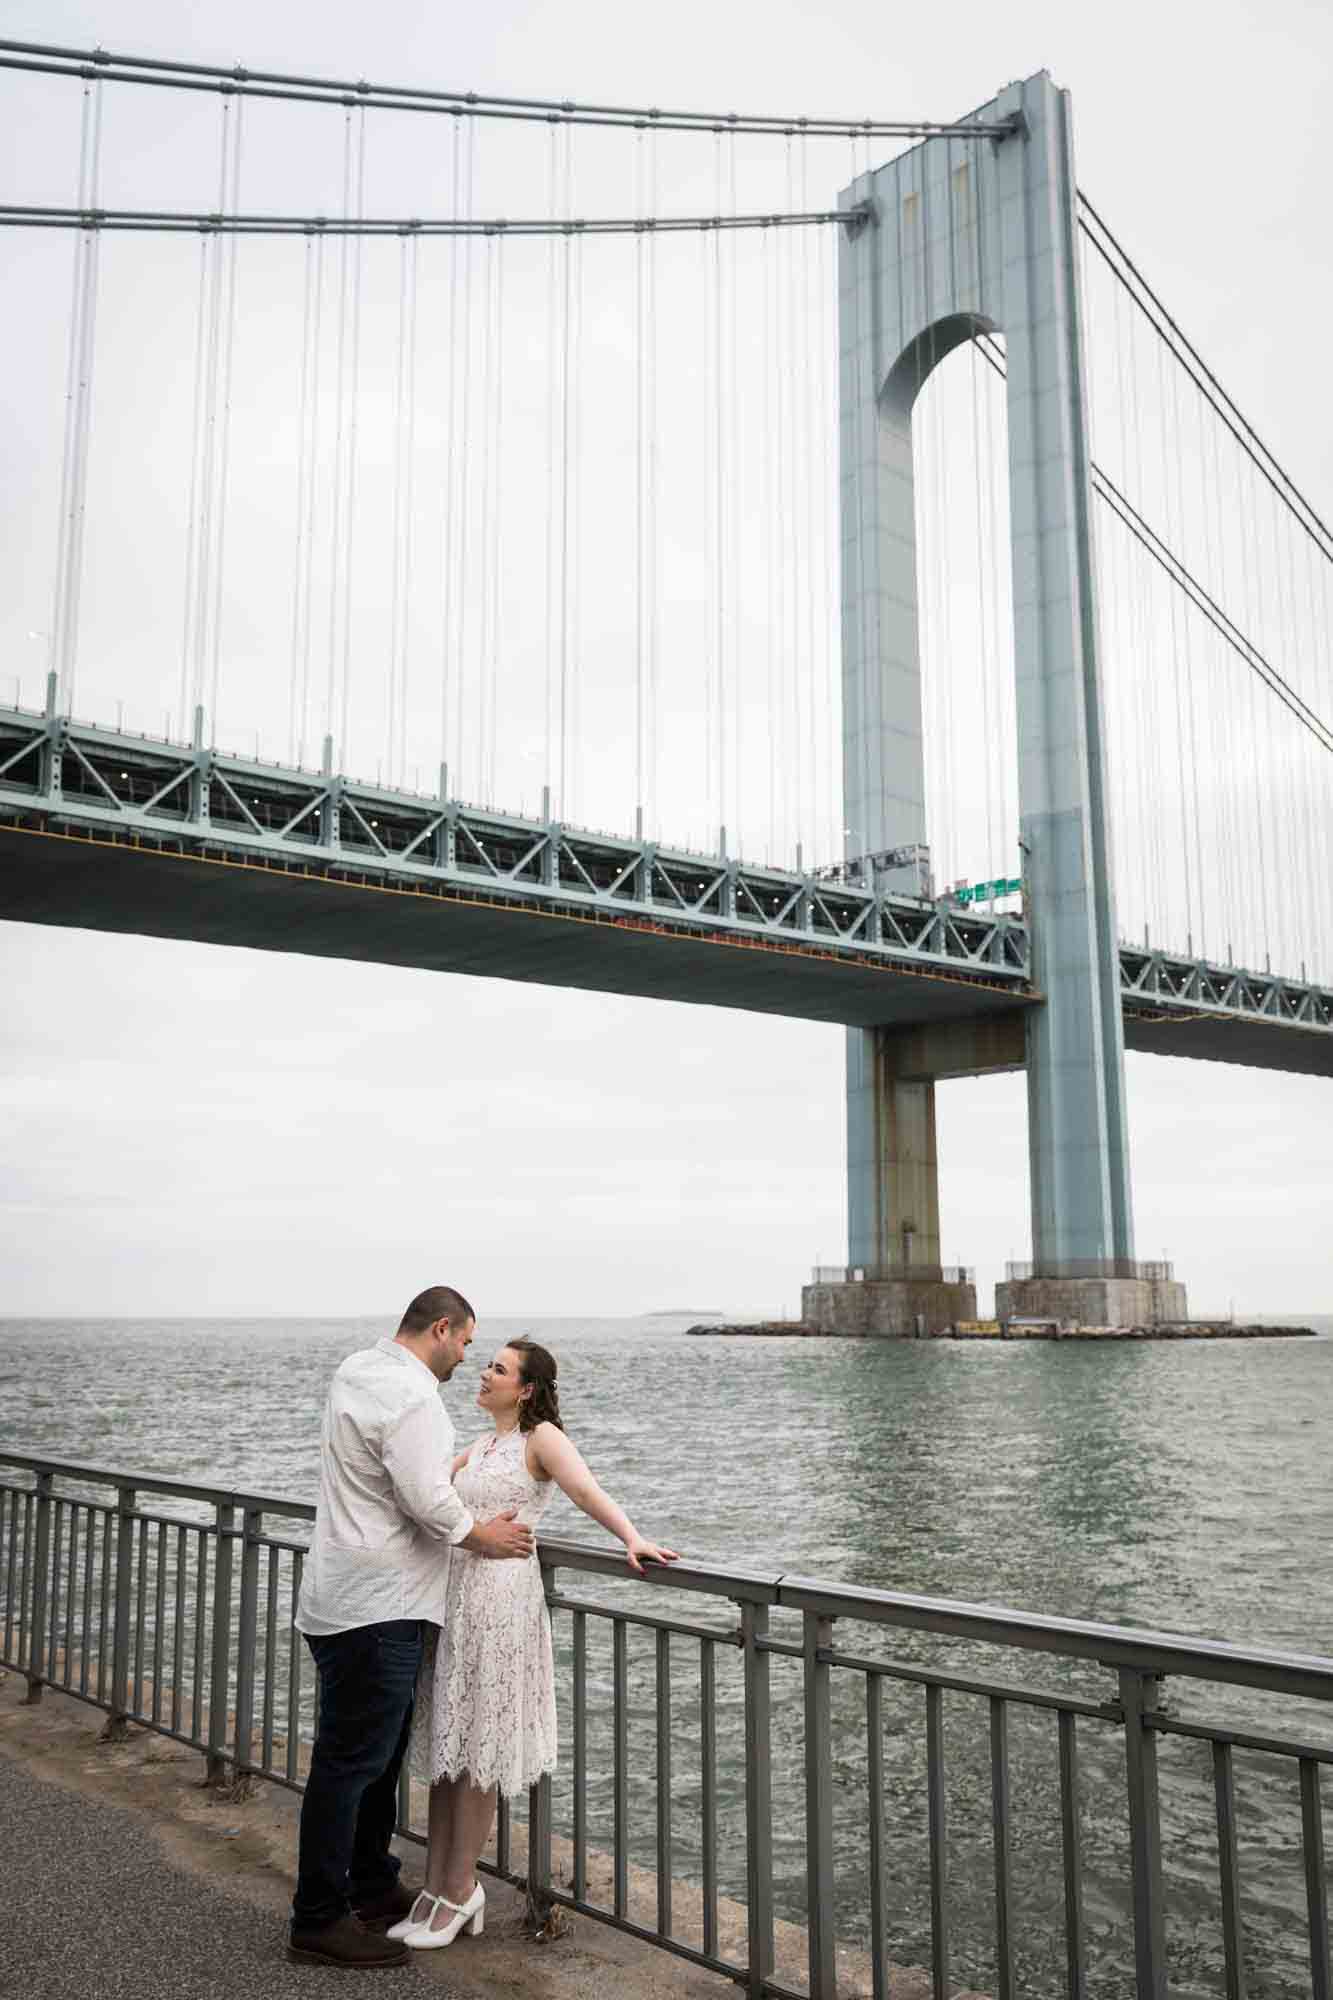 Couple hugging against railing in front of Verrazano Bridge during a Dyker Heights engagement shoot